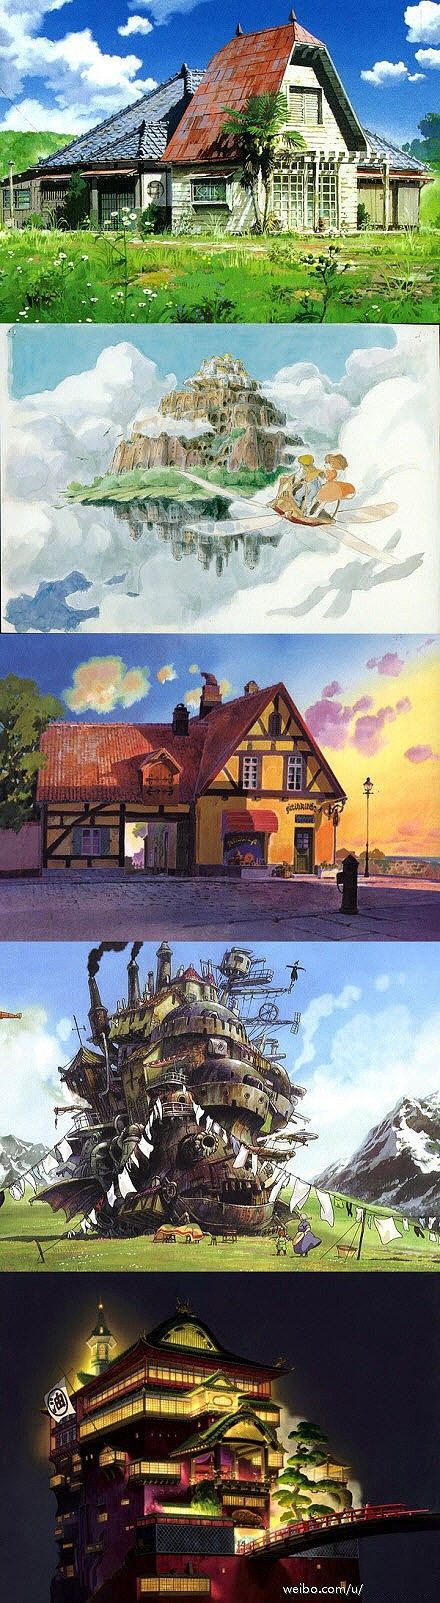 My Neighbor Totoro, Castle in the Sky, Kiki's Delivery Service, Howl's Moving Castle, and Spirited Away